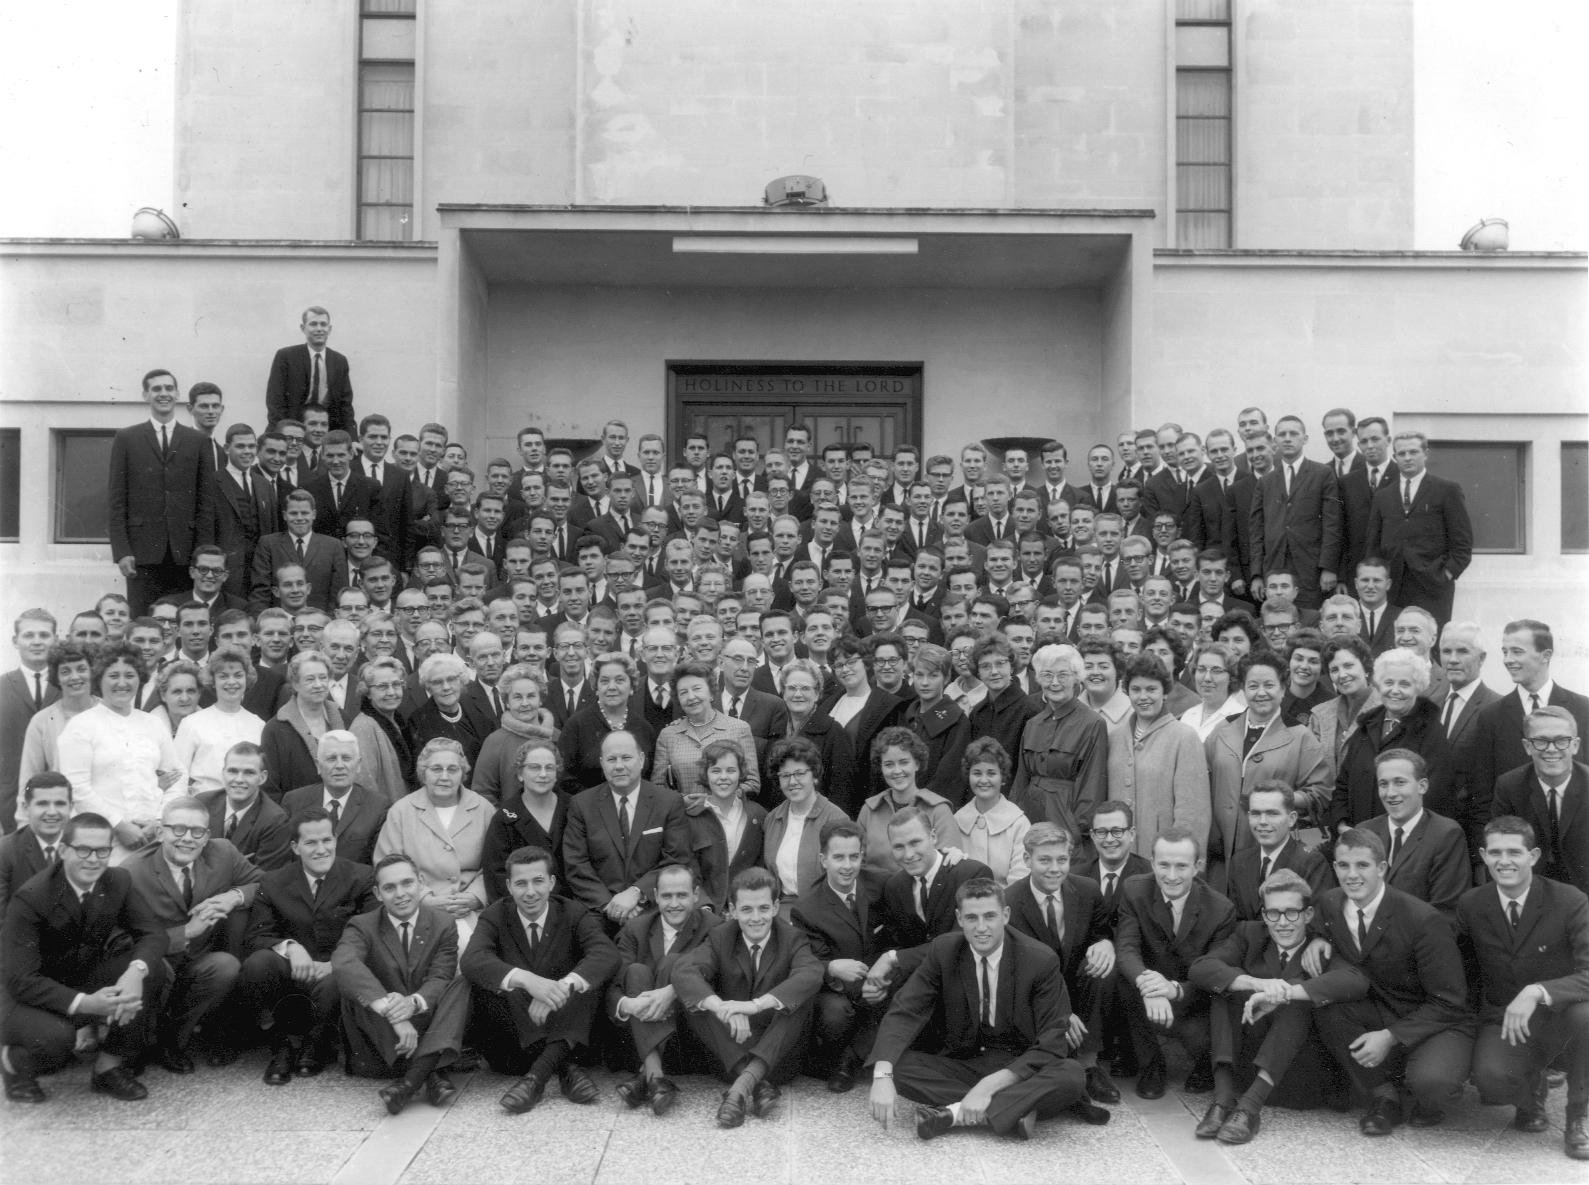 Mission Photo, October 1962 @ London Temple